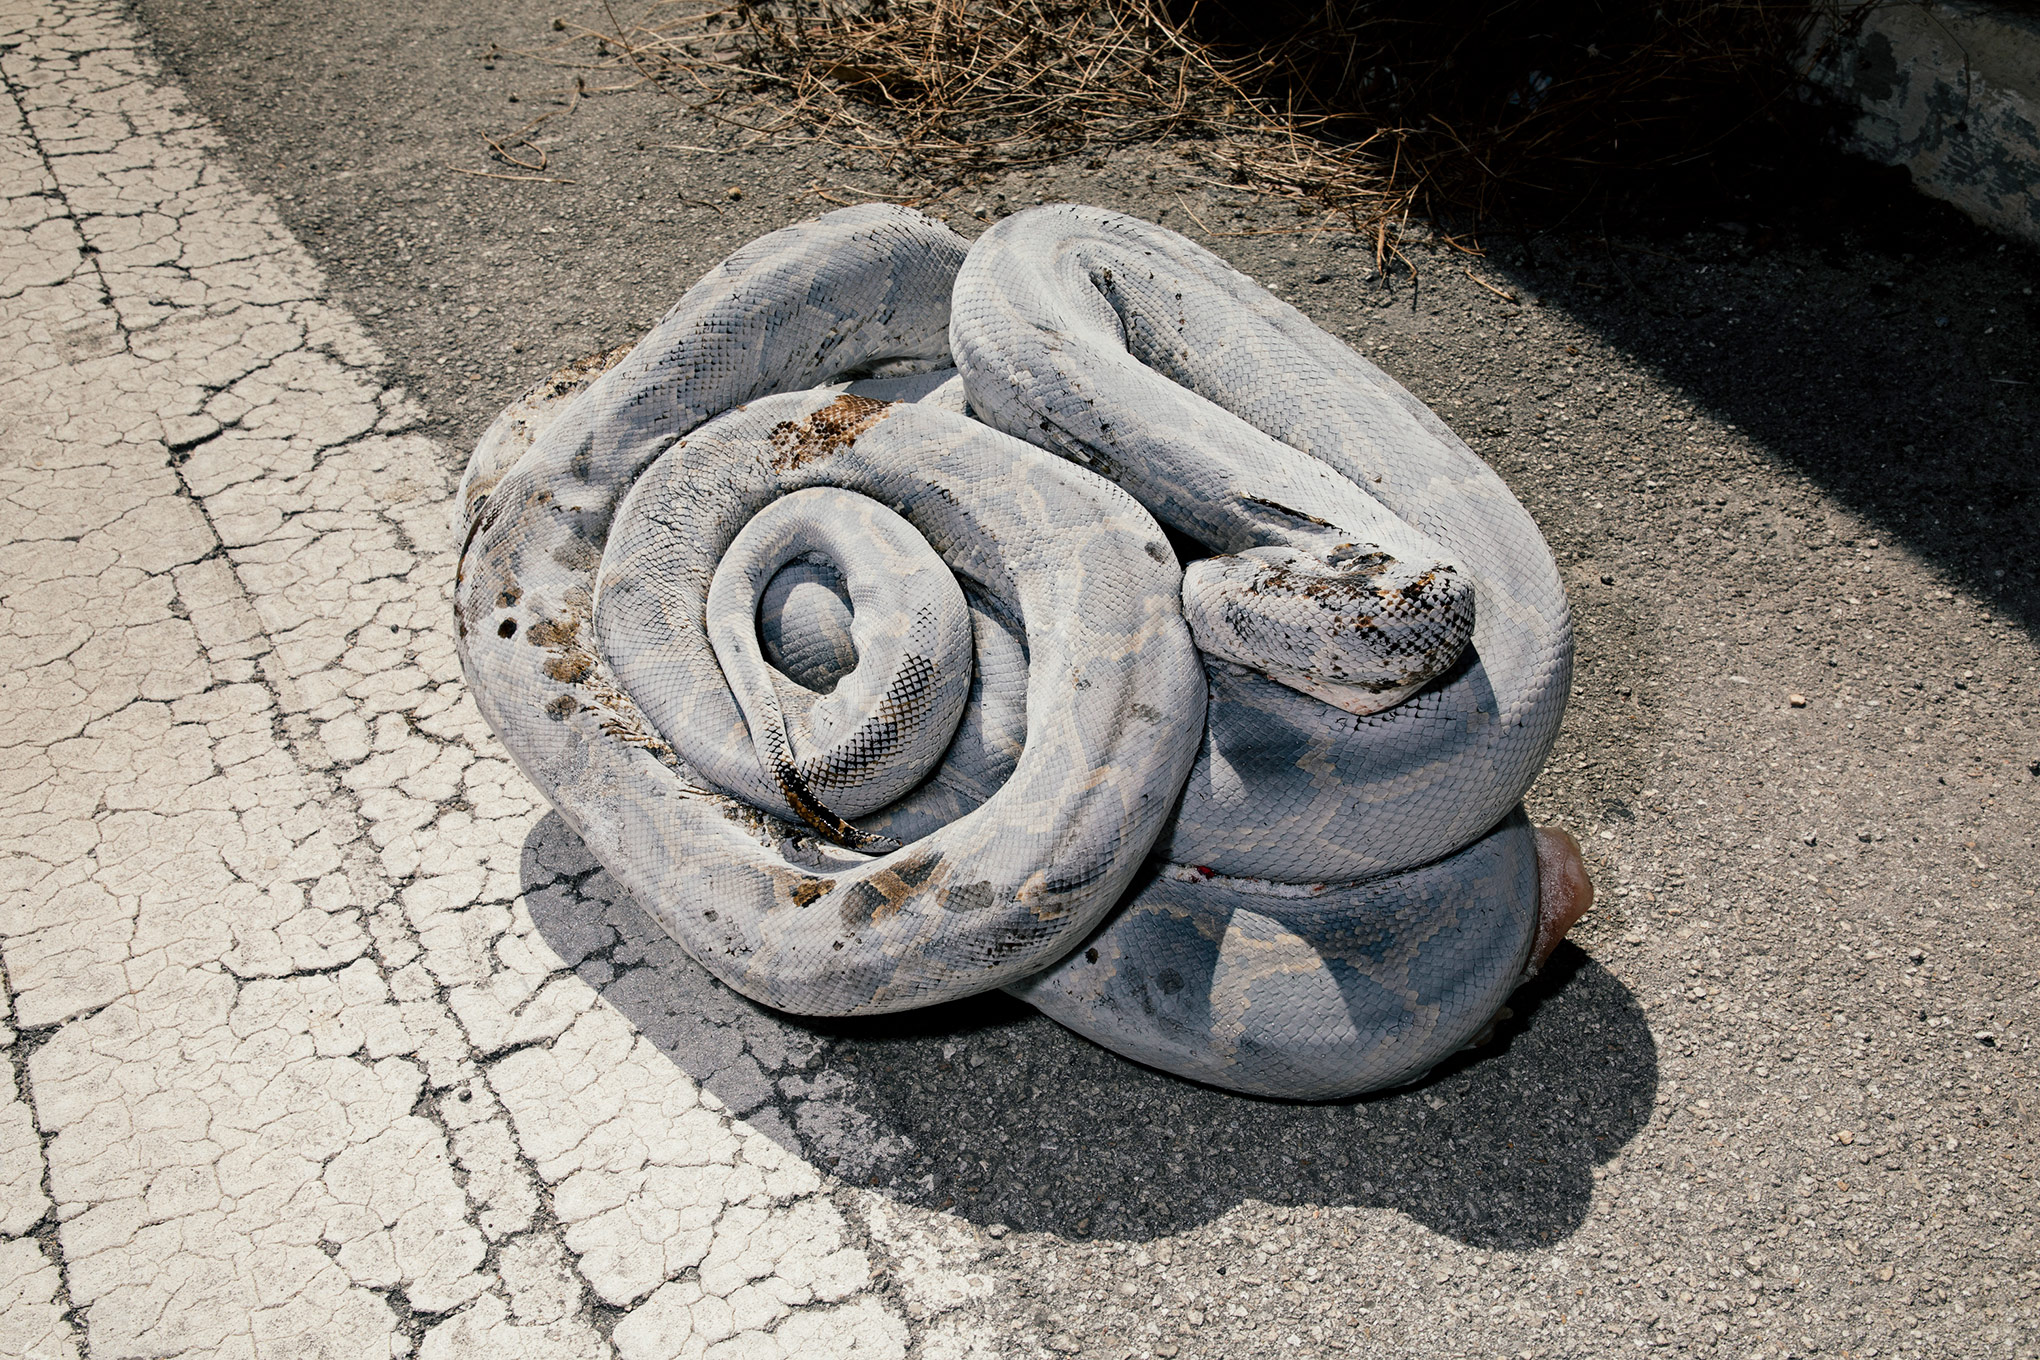 A frozen Burmese python lies outside the Homestead South Florida Water Management Station in Florida. Snakes are frozen to prevent the skin from decaying so that they can later be made into goods. (Peter Fisher for TIME)